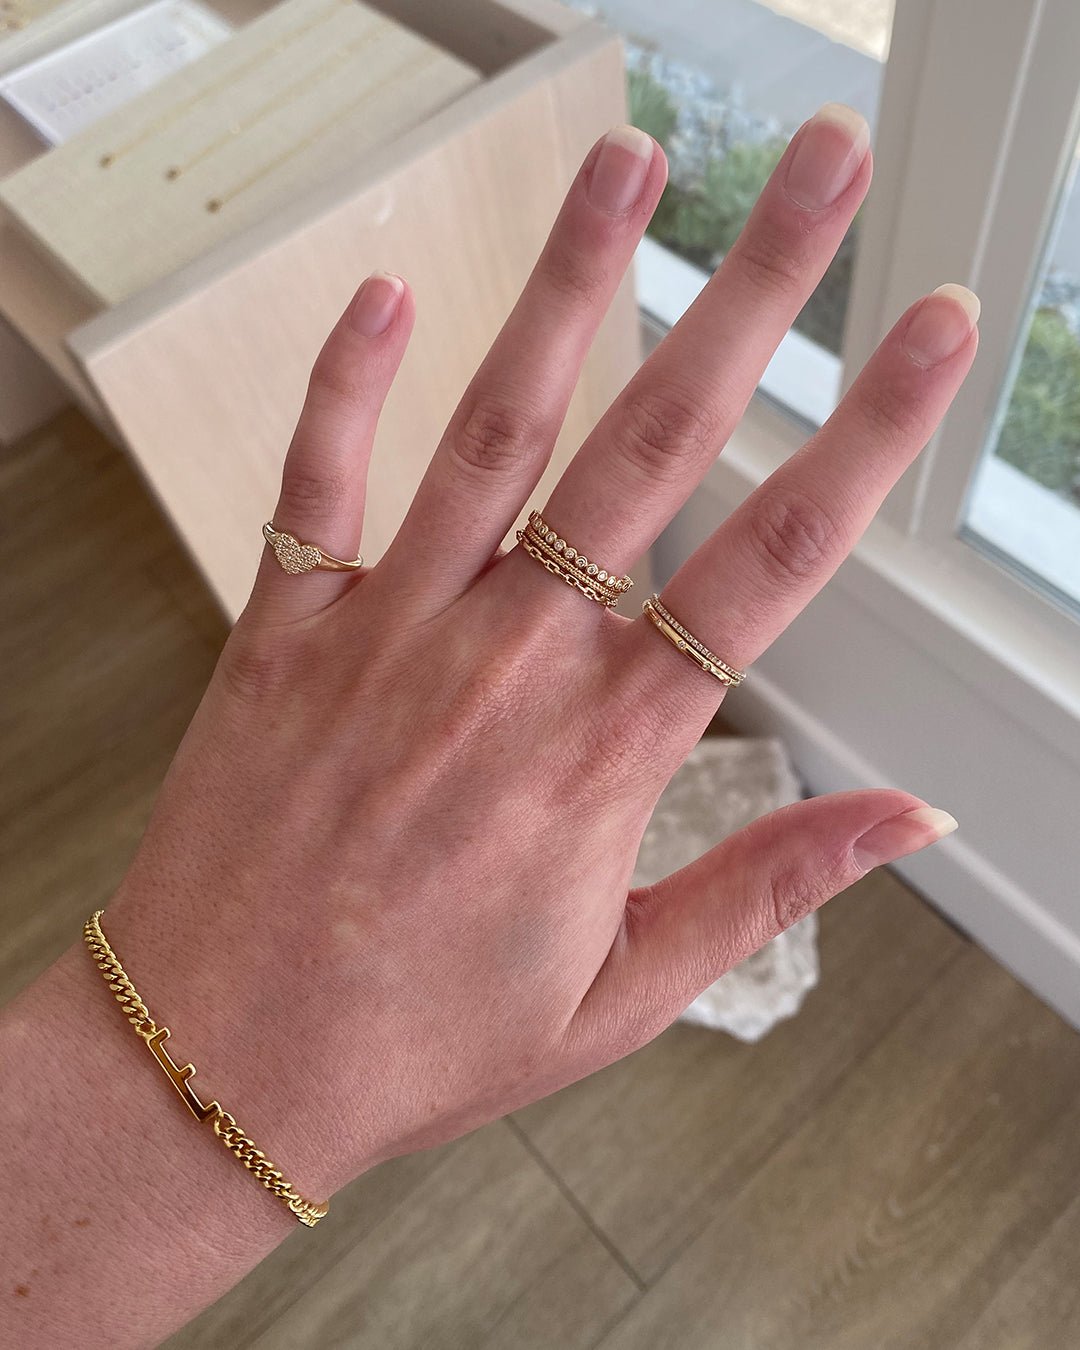 Woman wearing 14k gold rings and a gold plated alphabet bracelet.